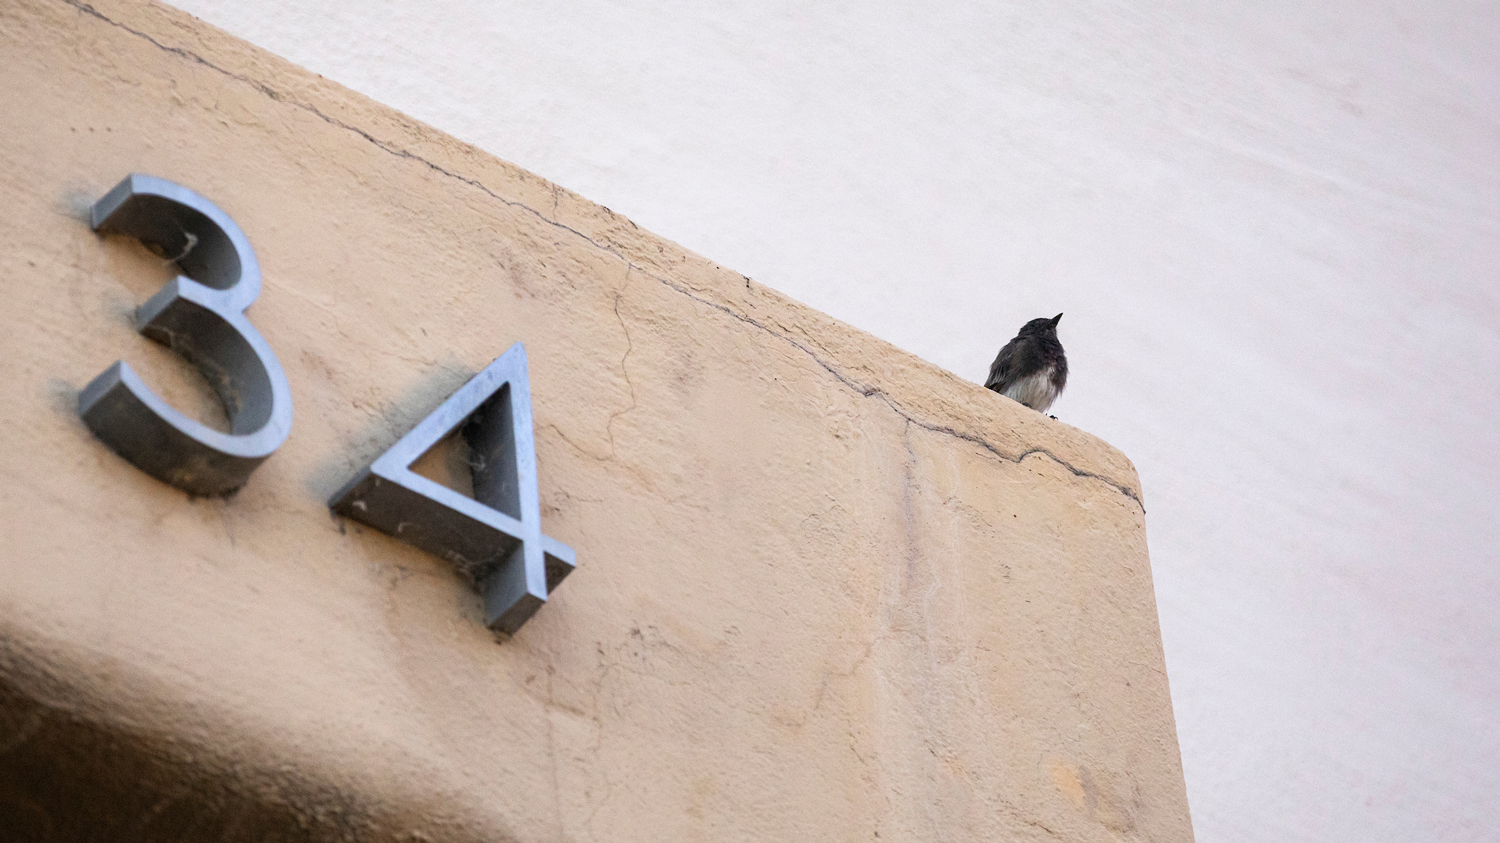 A bird sits on the edge of a building with the number 34 on it